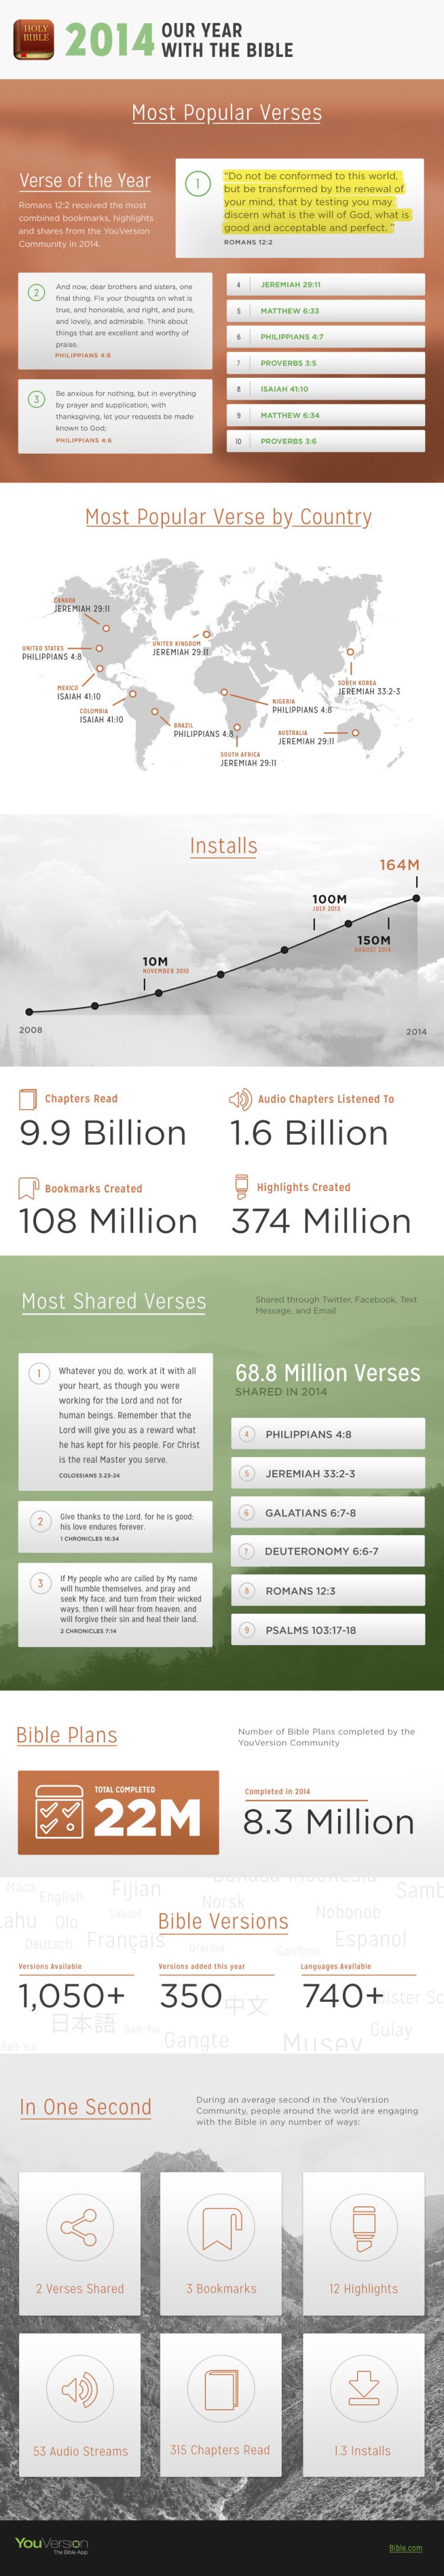 YouVersion 2014 in Review